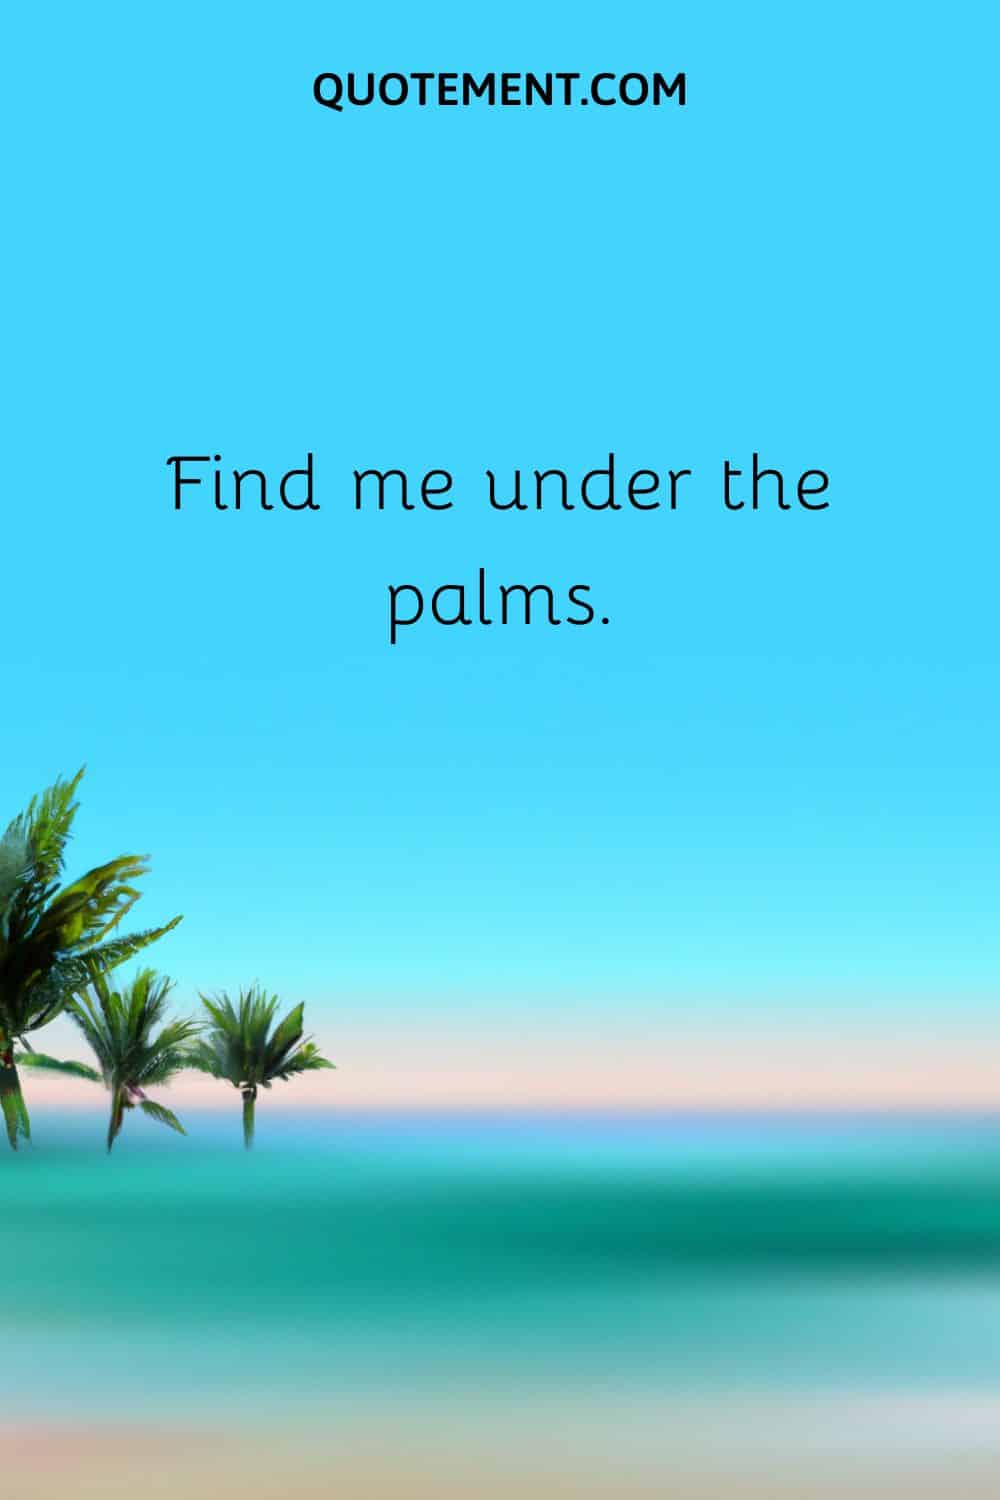 Find me under the palms